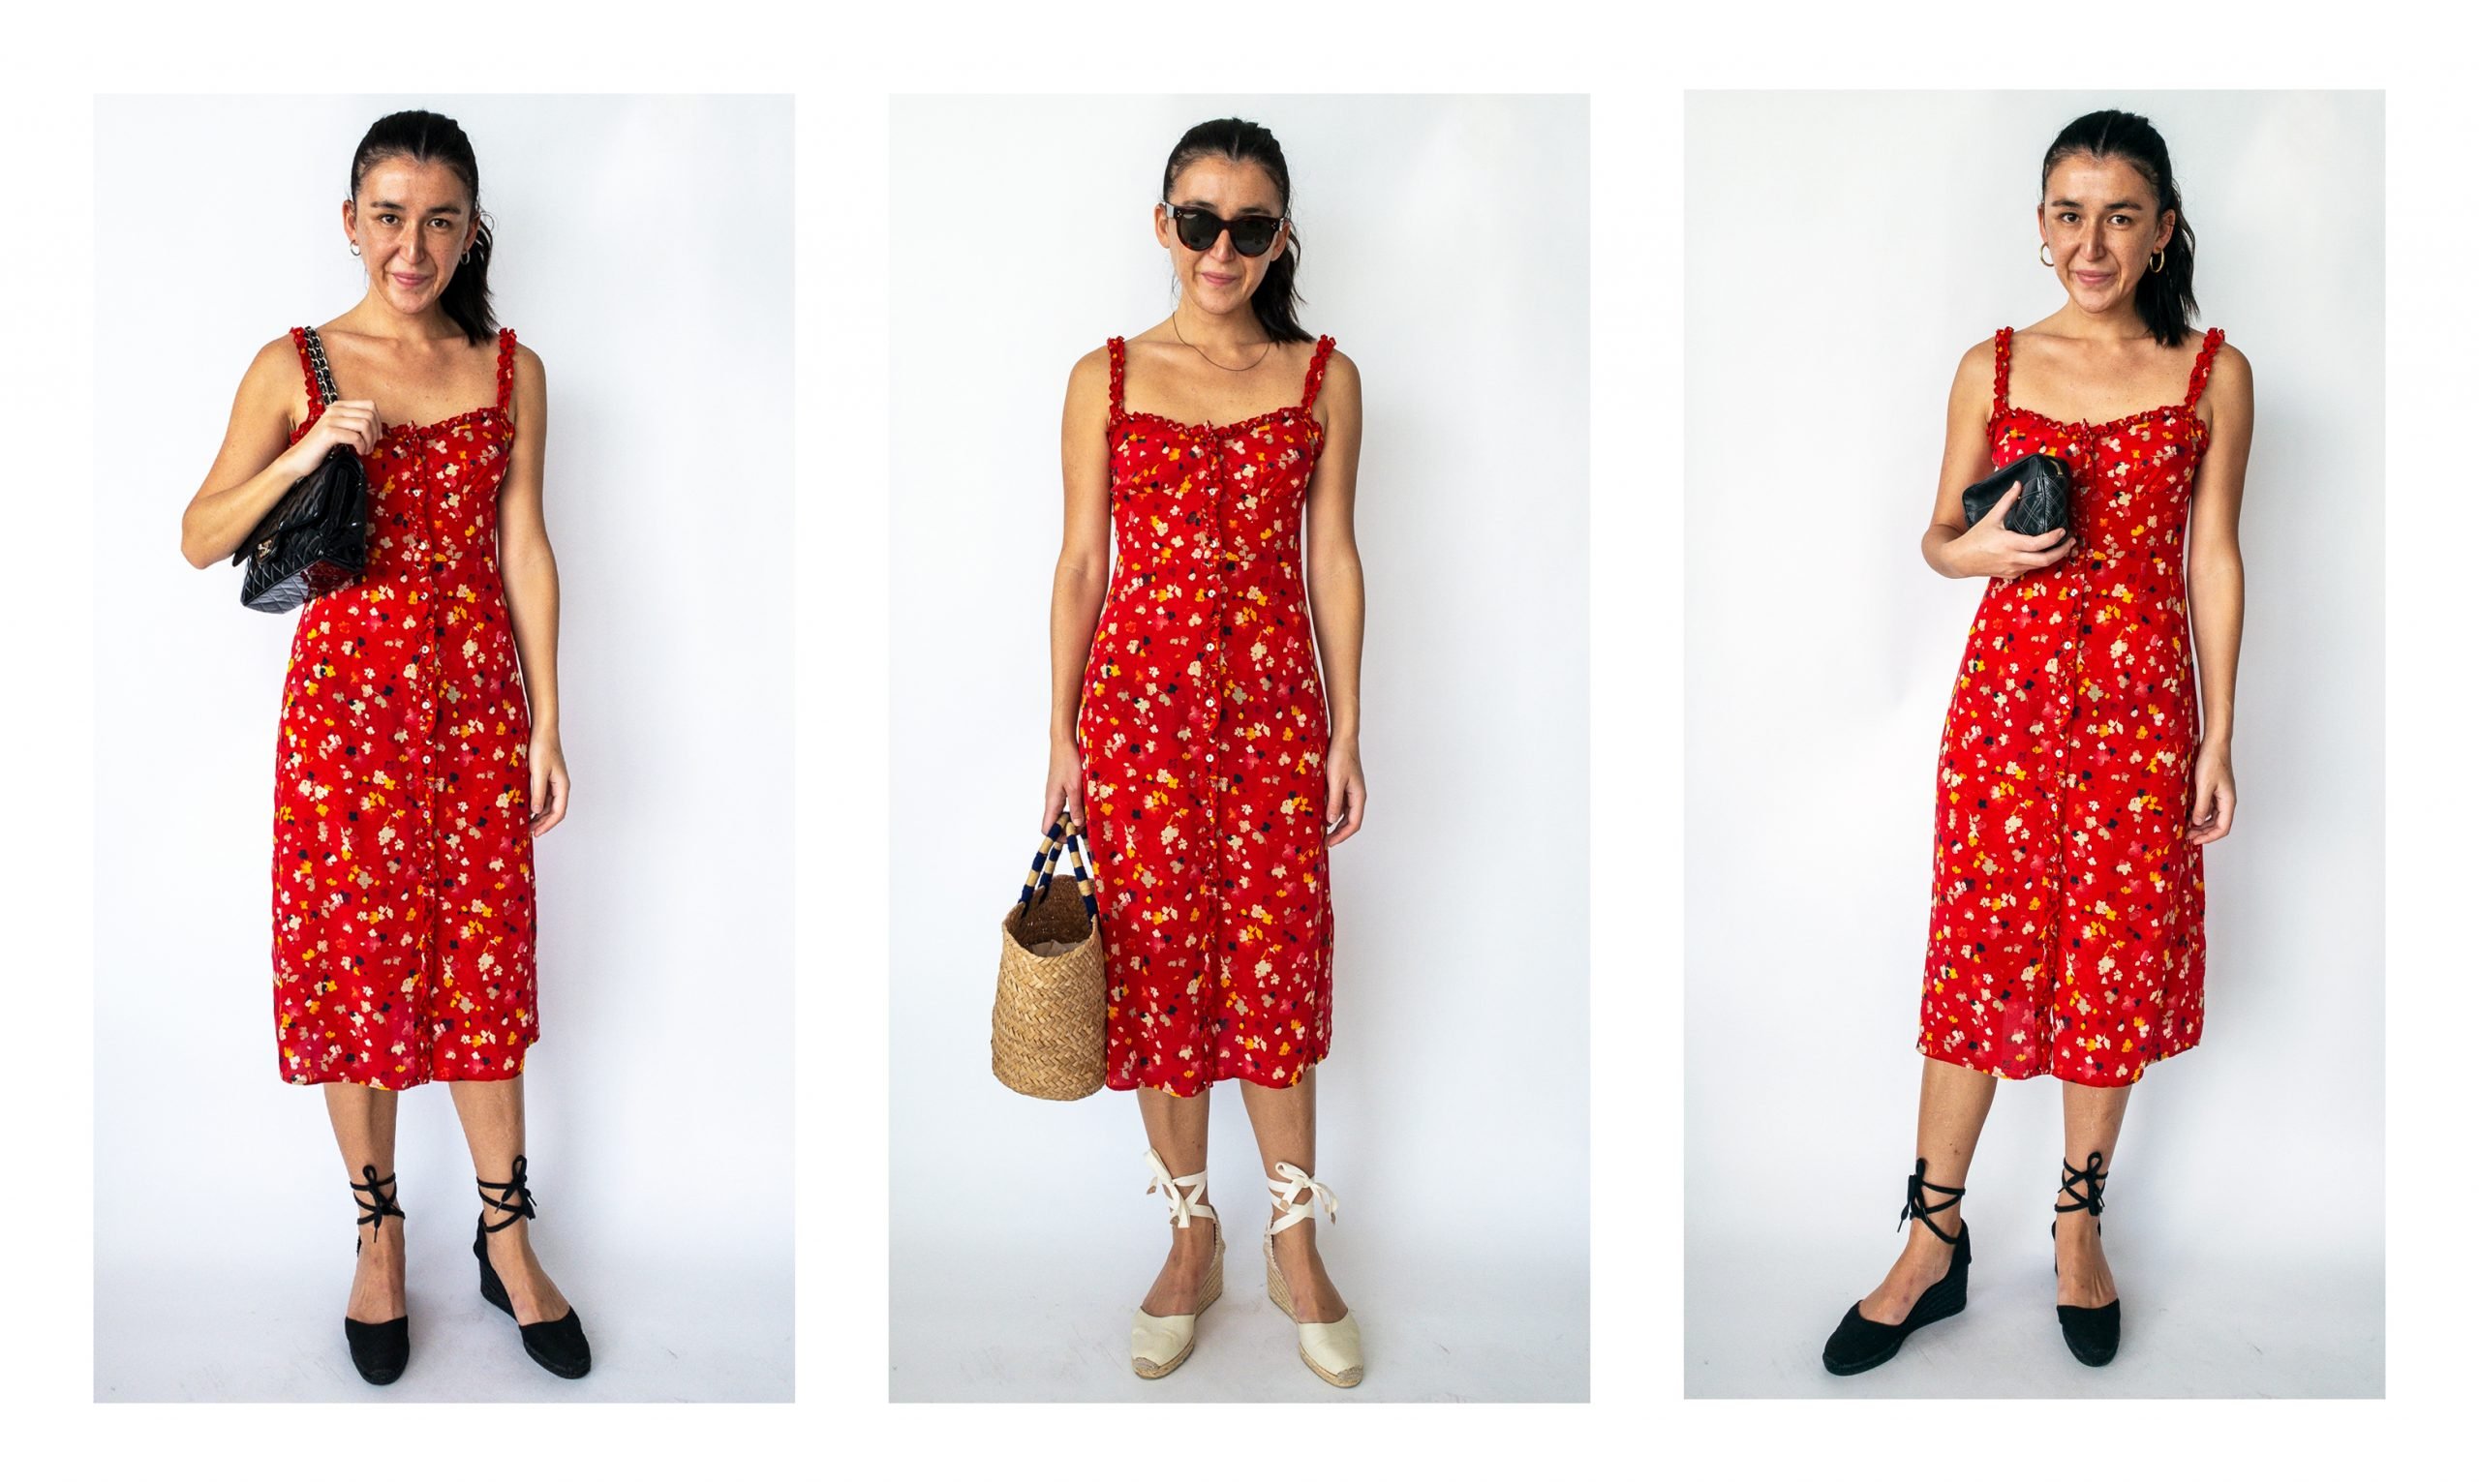 Midi dress with espadrilles outfits